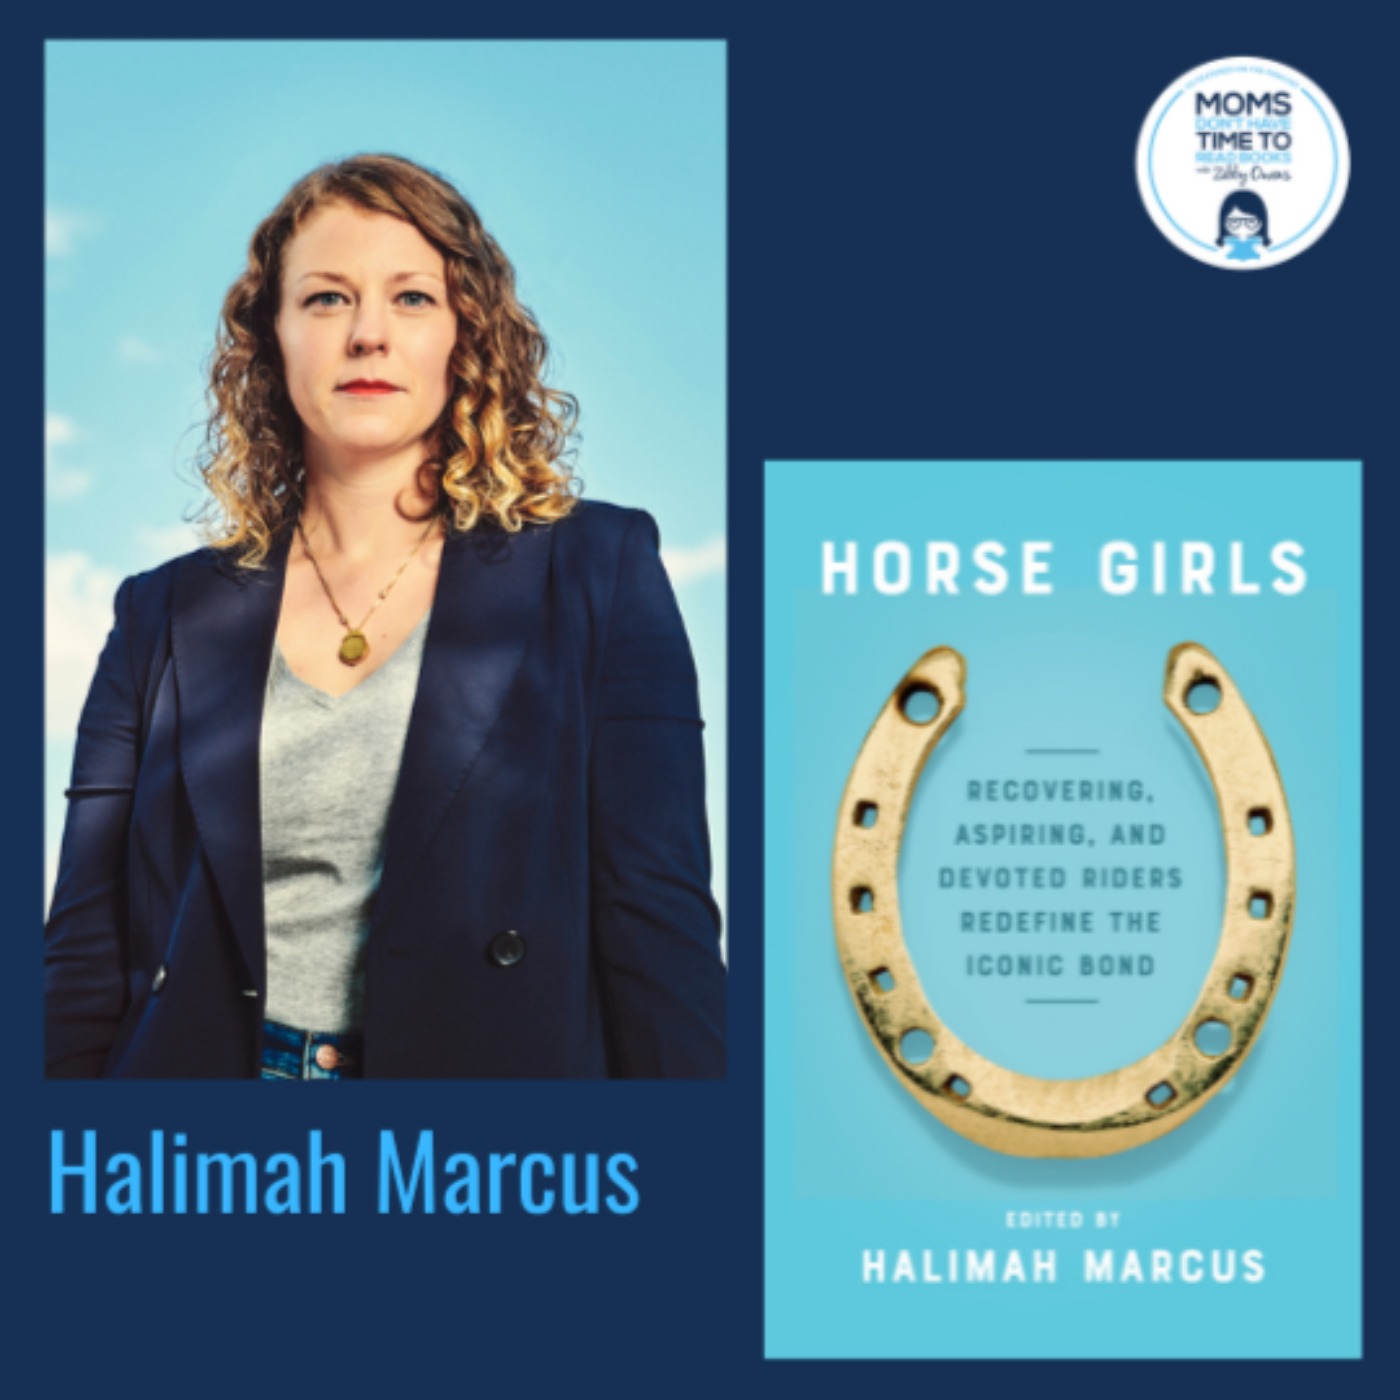 Halimah Marcus, HORSE GIRLS: Recovering, Aspiring, and Devoted Riders Redefine the Iconic Bond